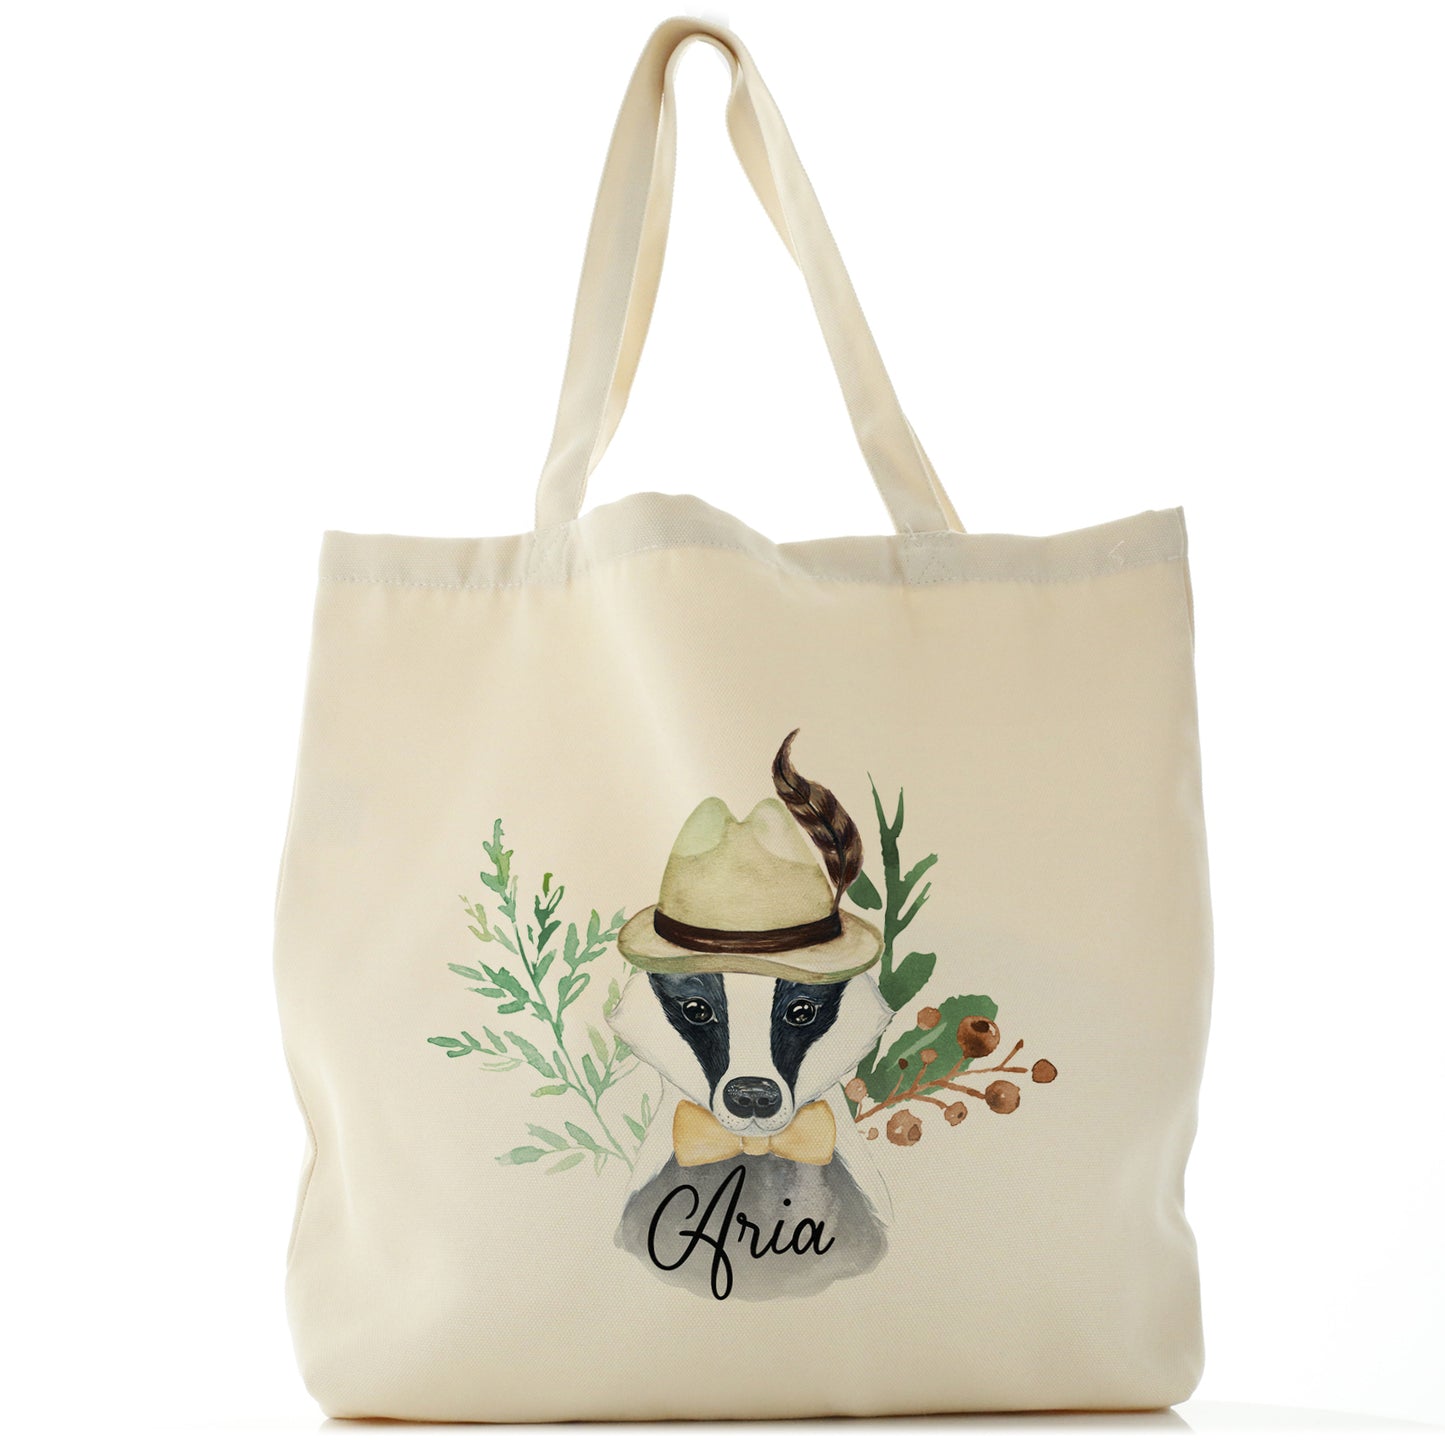 Personalised Canvas Tote Bag with Badger Feather Hat and Cute Text